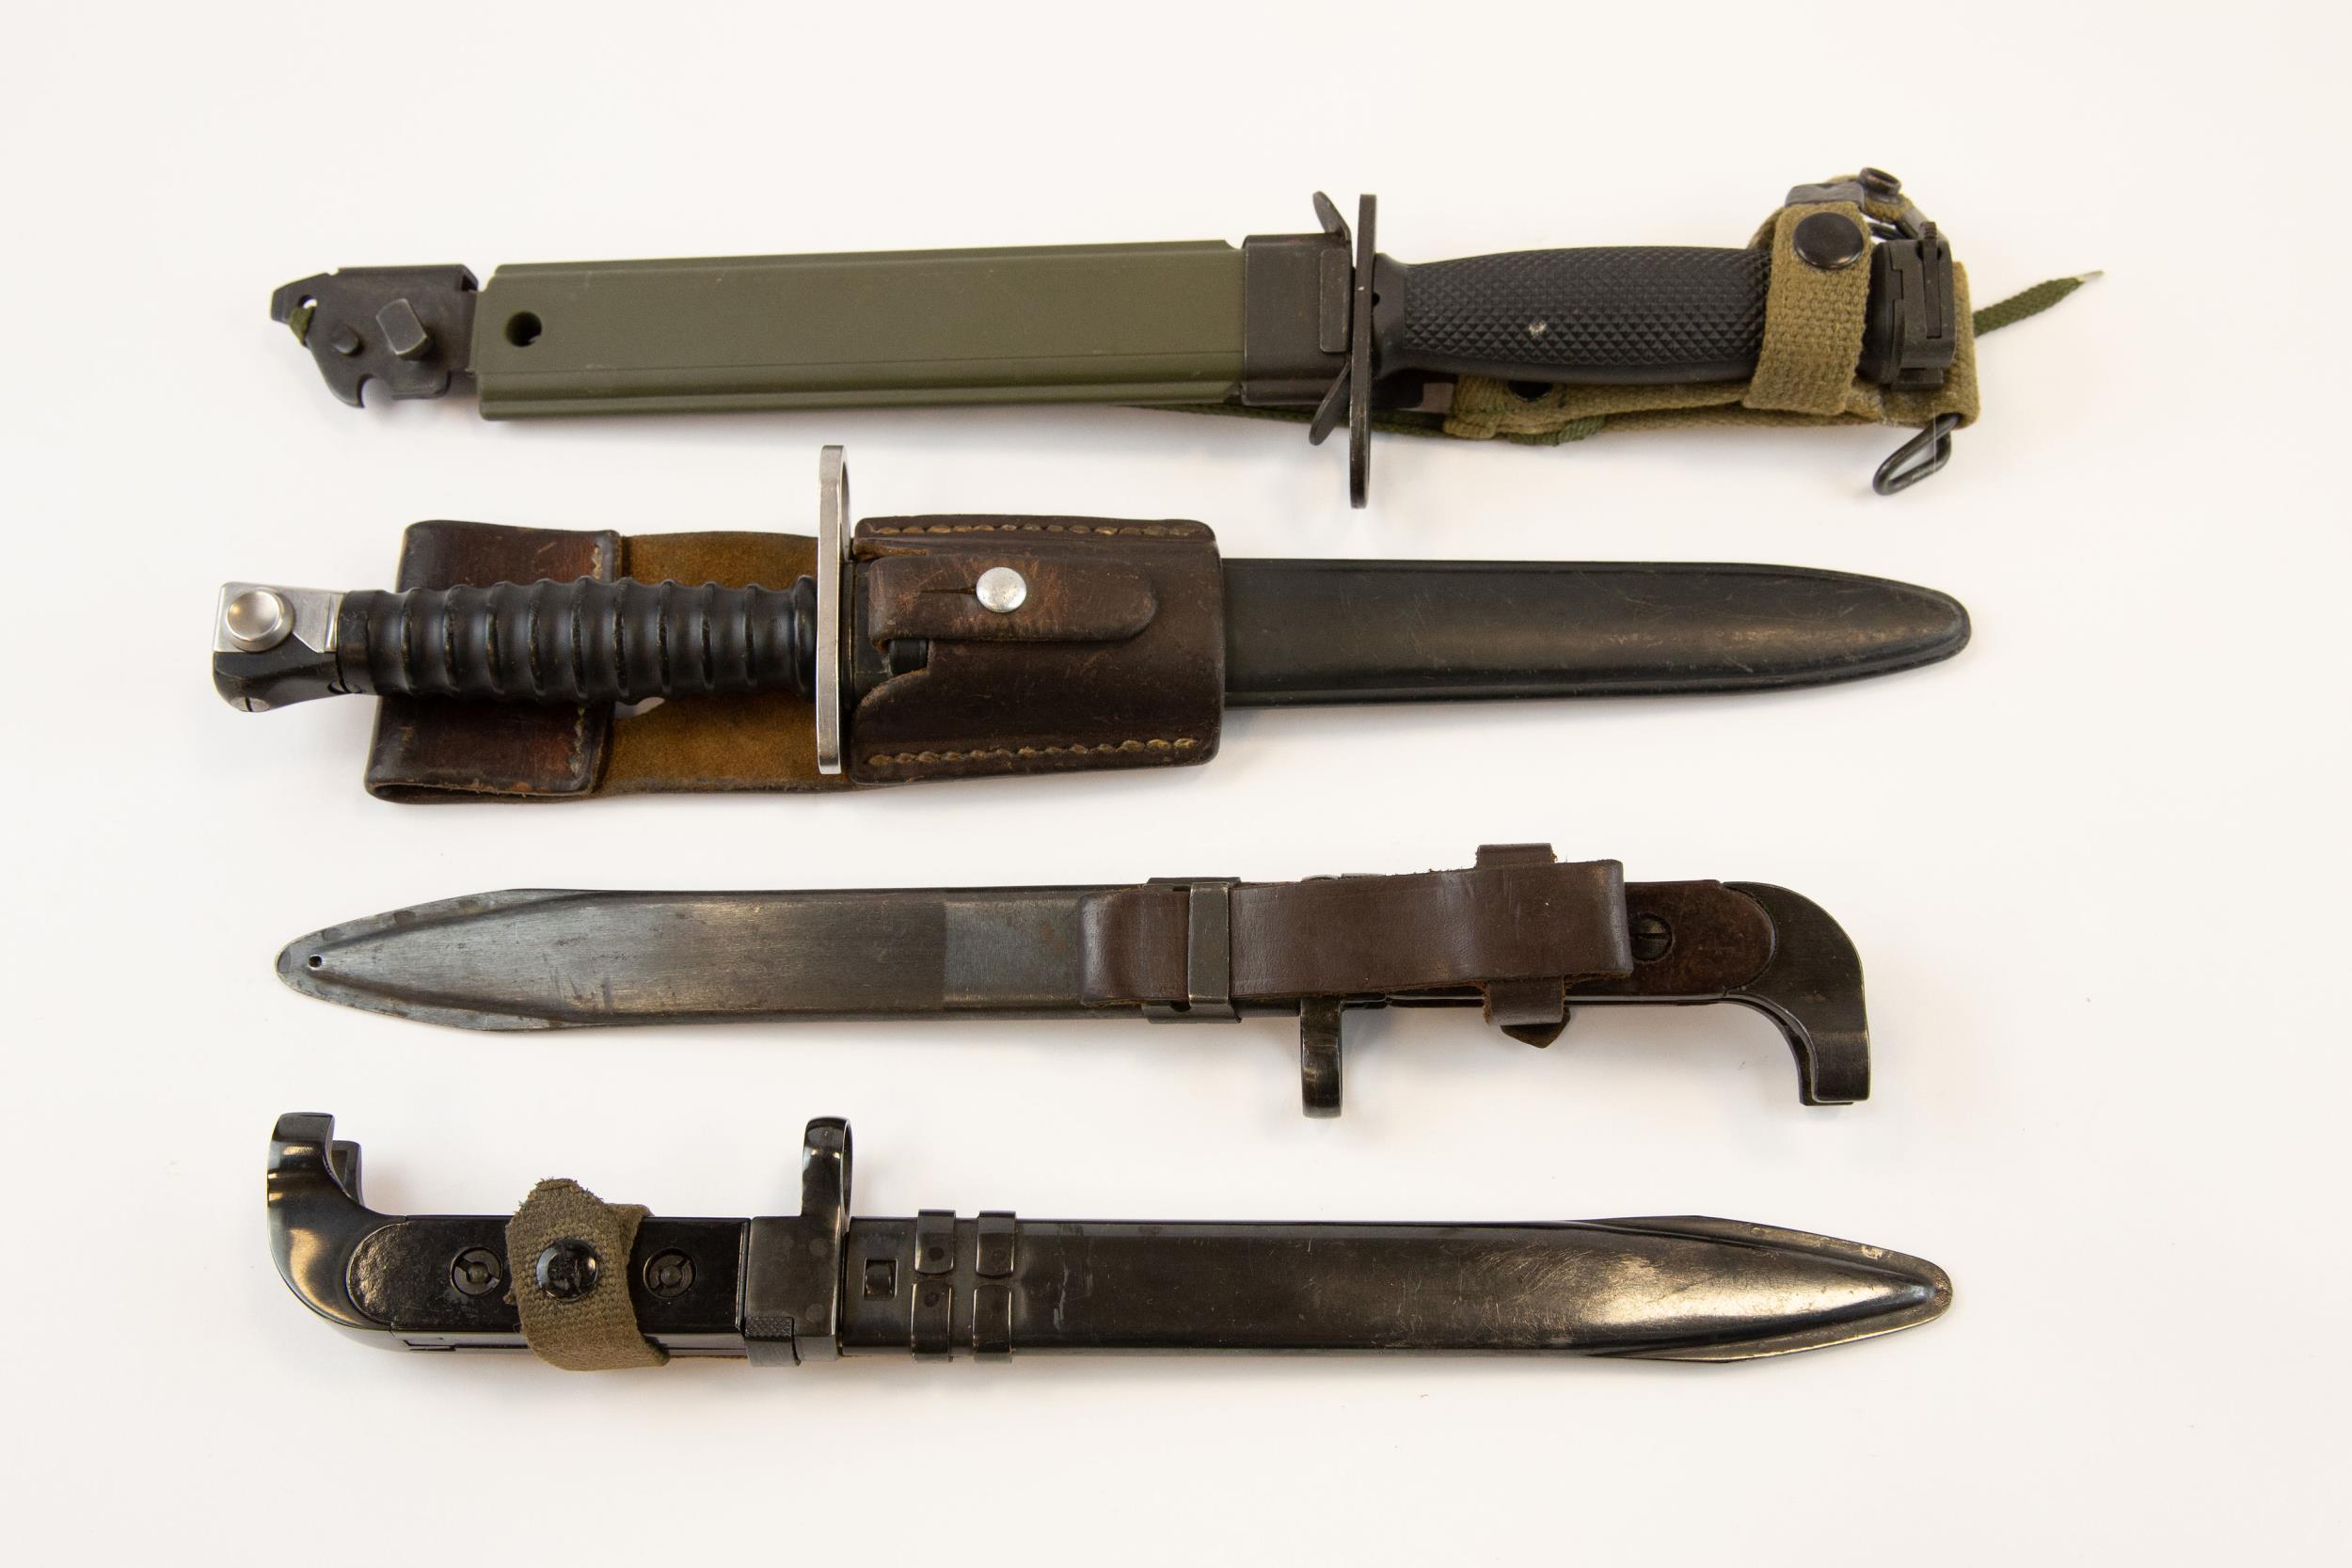 An AK 47 bayonet, with black grips, another with brown grips; a Swiss SG 57 bayonet; an M7 type